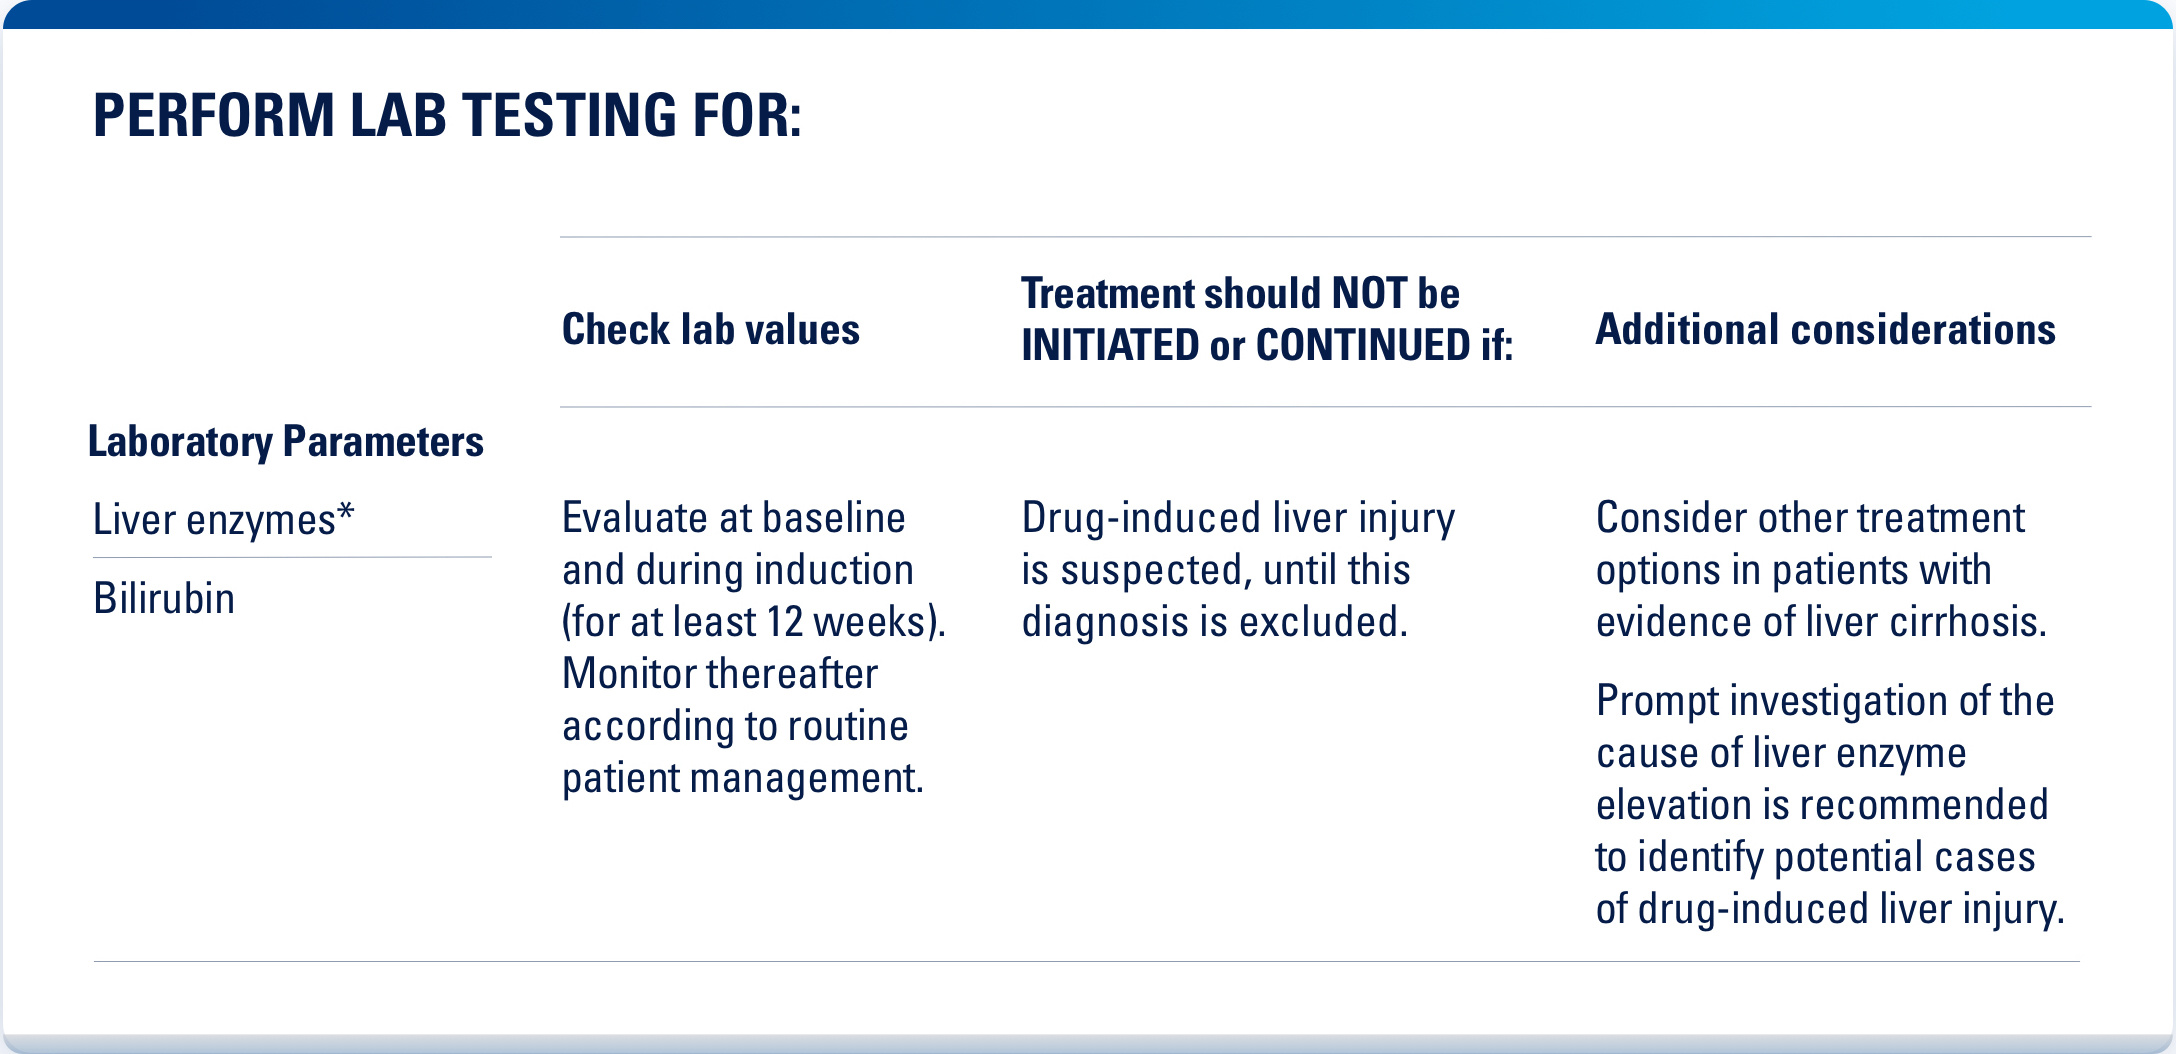 Perform lab testing for these laboratory parameters: liver enzymes and bilirubin. Check lab value: Evaluate at baseline and during induction (for at least 12 weeks) Monitor thereafter according to routine management. Treatment should not be initiated or continued if drug-induced liver injury is suspected, until this diagnosis is excluded. Consider other treatment options in patients with evidence of liver cirrhosis. A prompt investigation of the cause of liver enzyme elevation is recommended to identify potential cases of drug-induced liver injury.